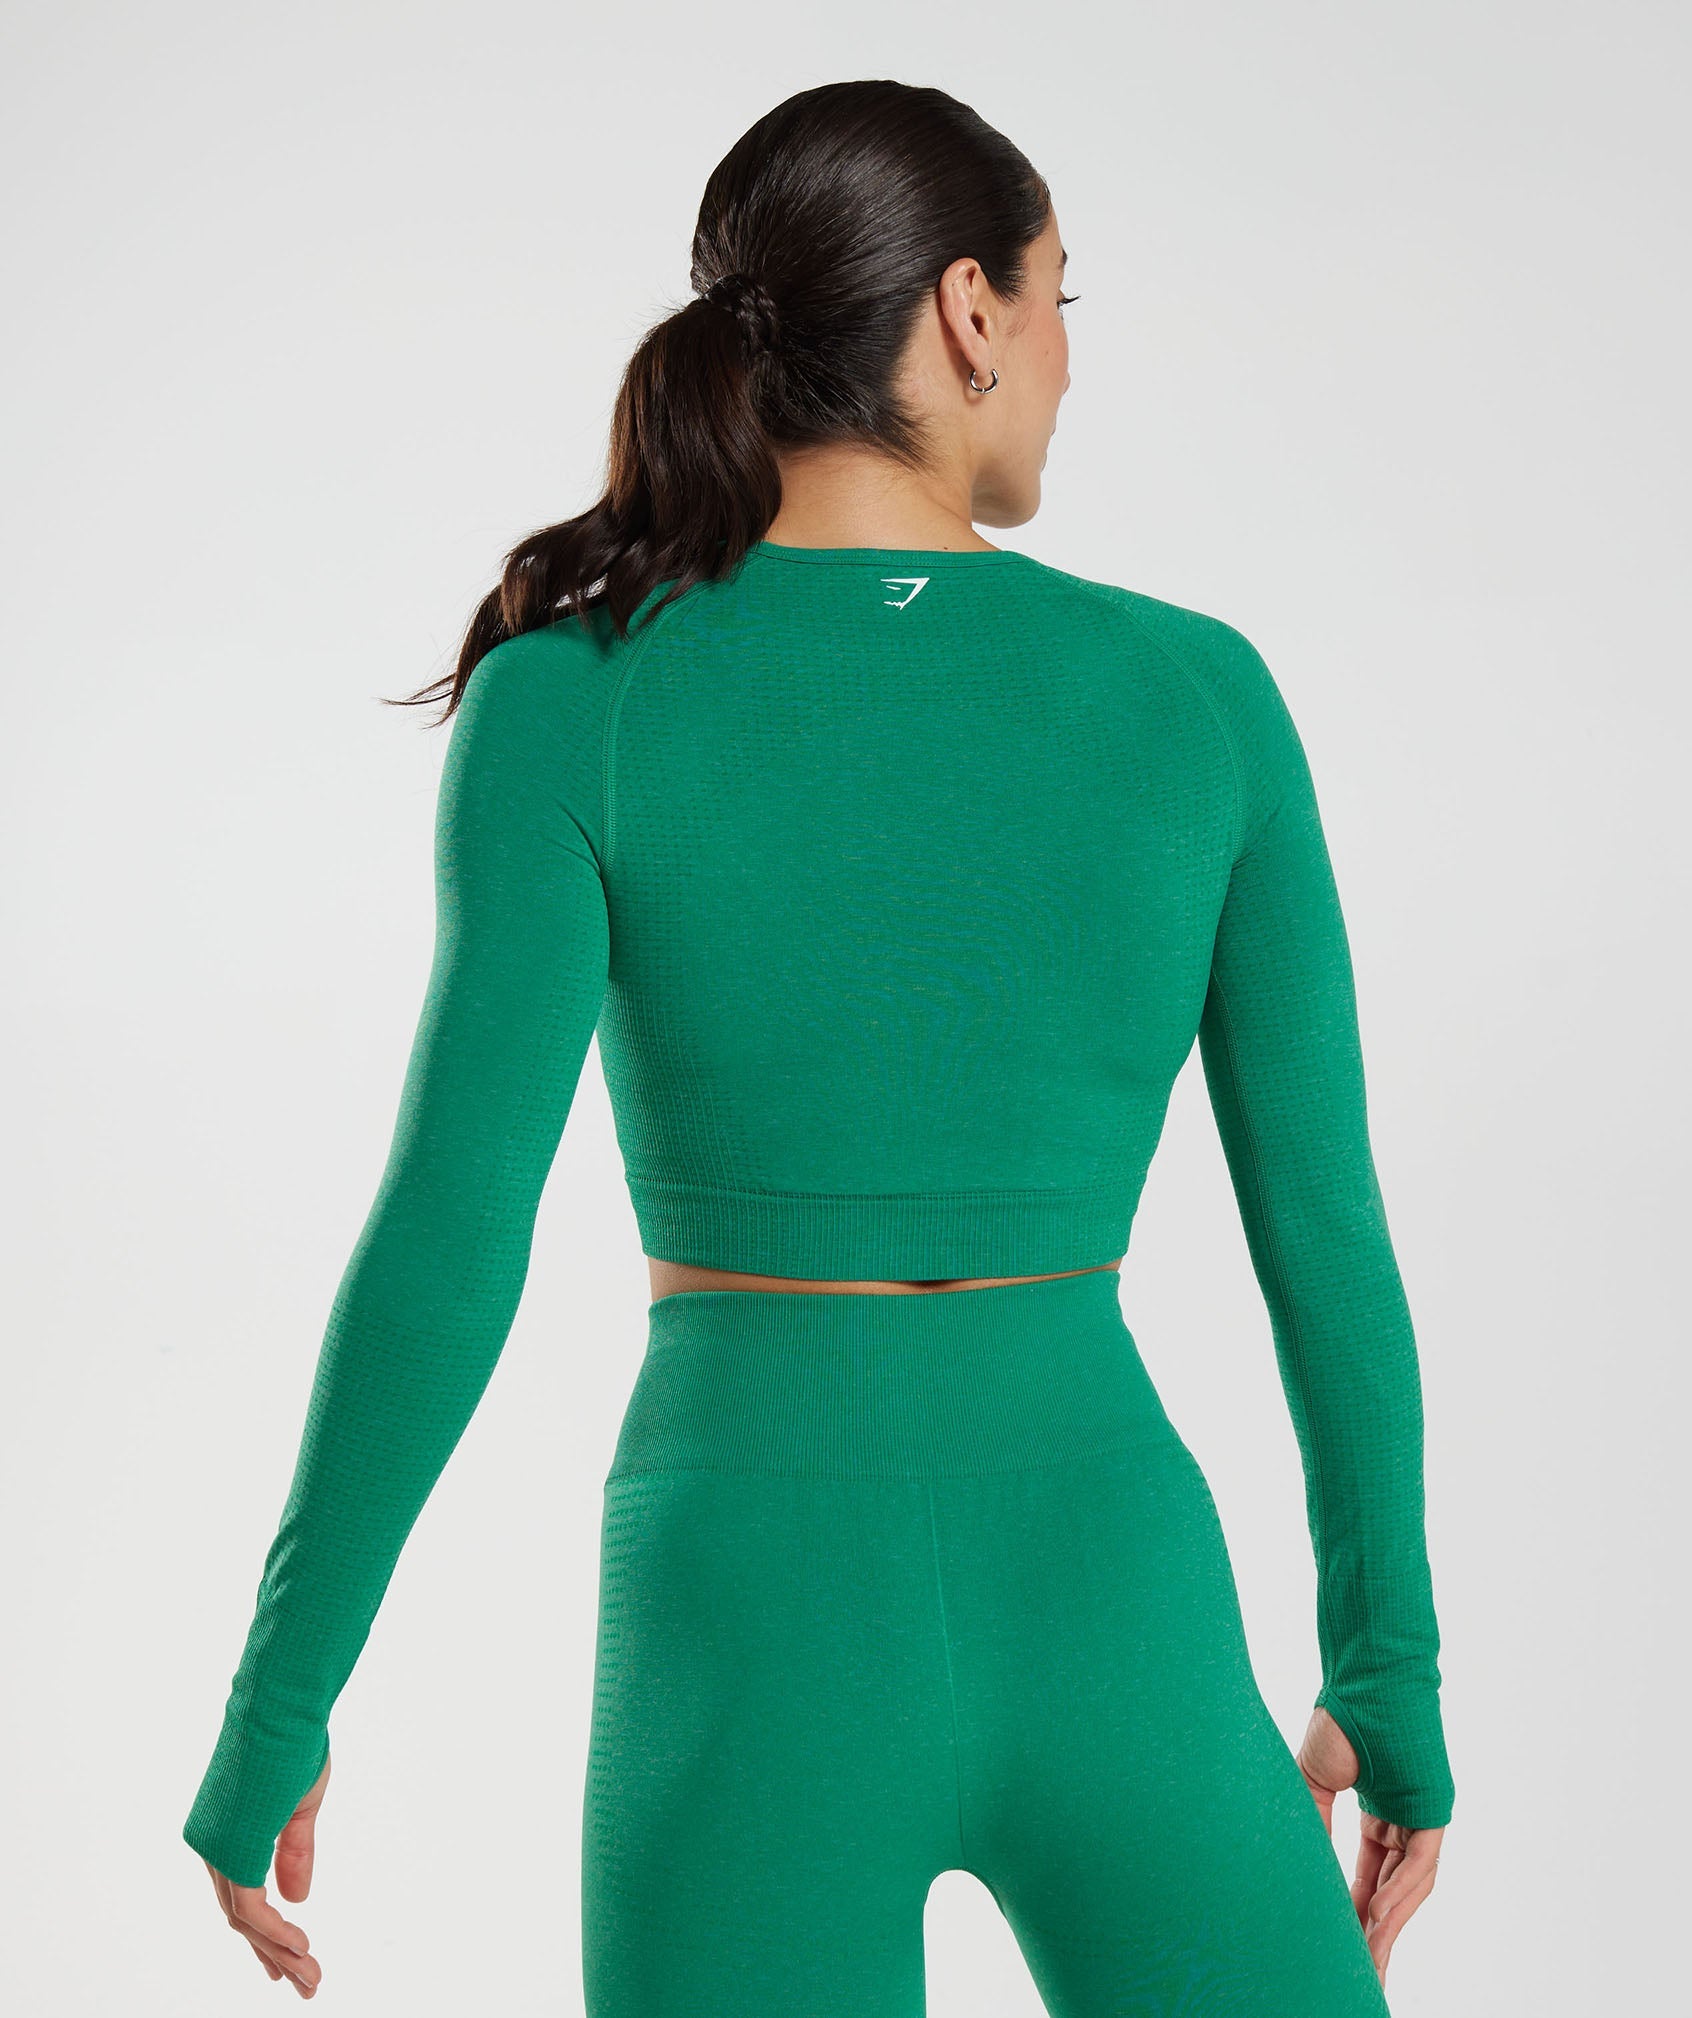 Vital Seamless 2.0 Crop Top in Bright Green Marl - view 3